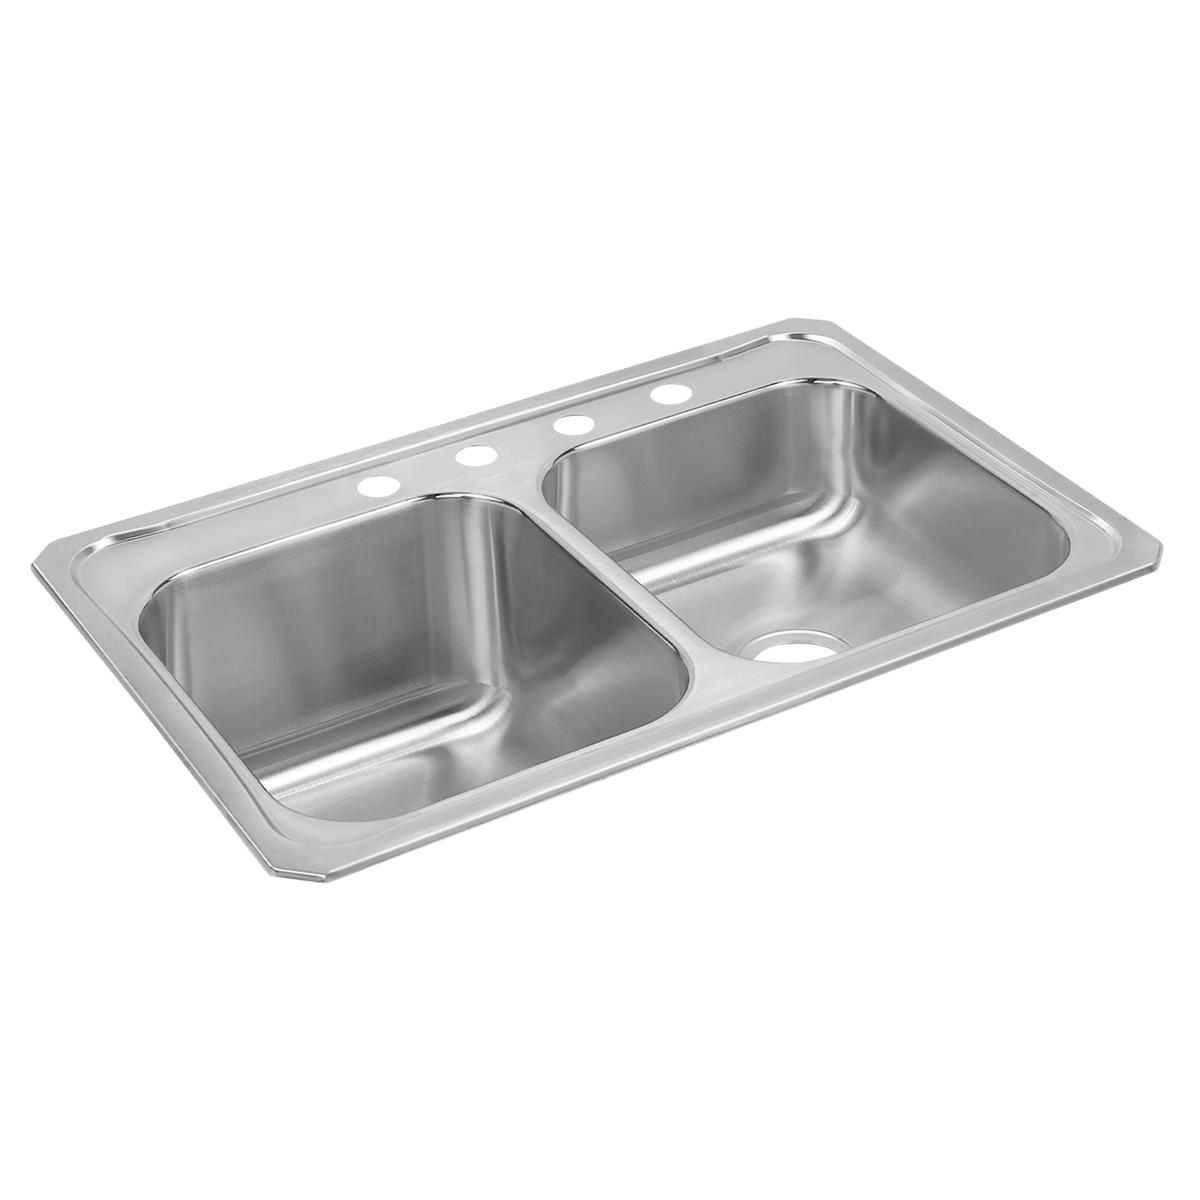 Elkay Celebrity 33" x 22" x 10-1/4" Equal Double Bowl Drop-in Sink with Right Small Bowl